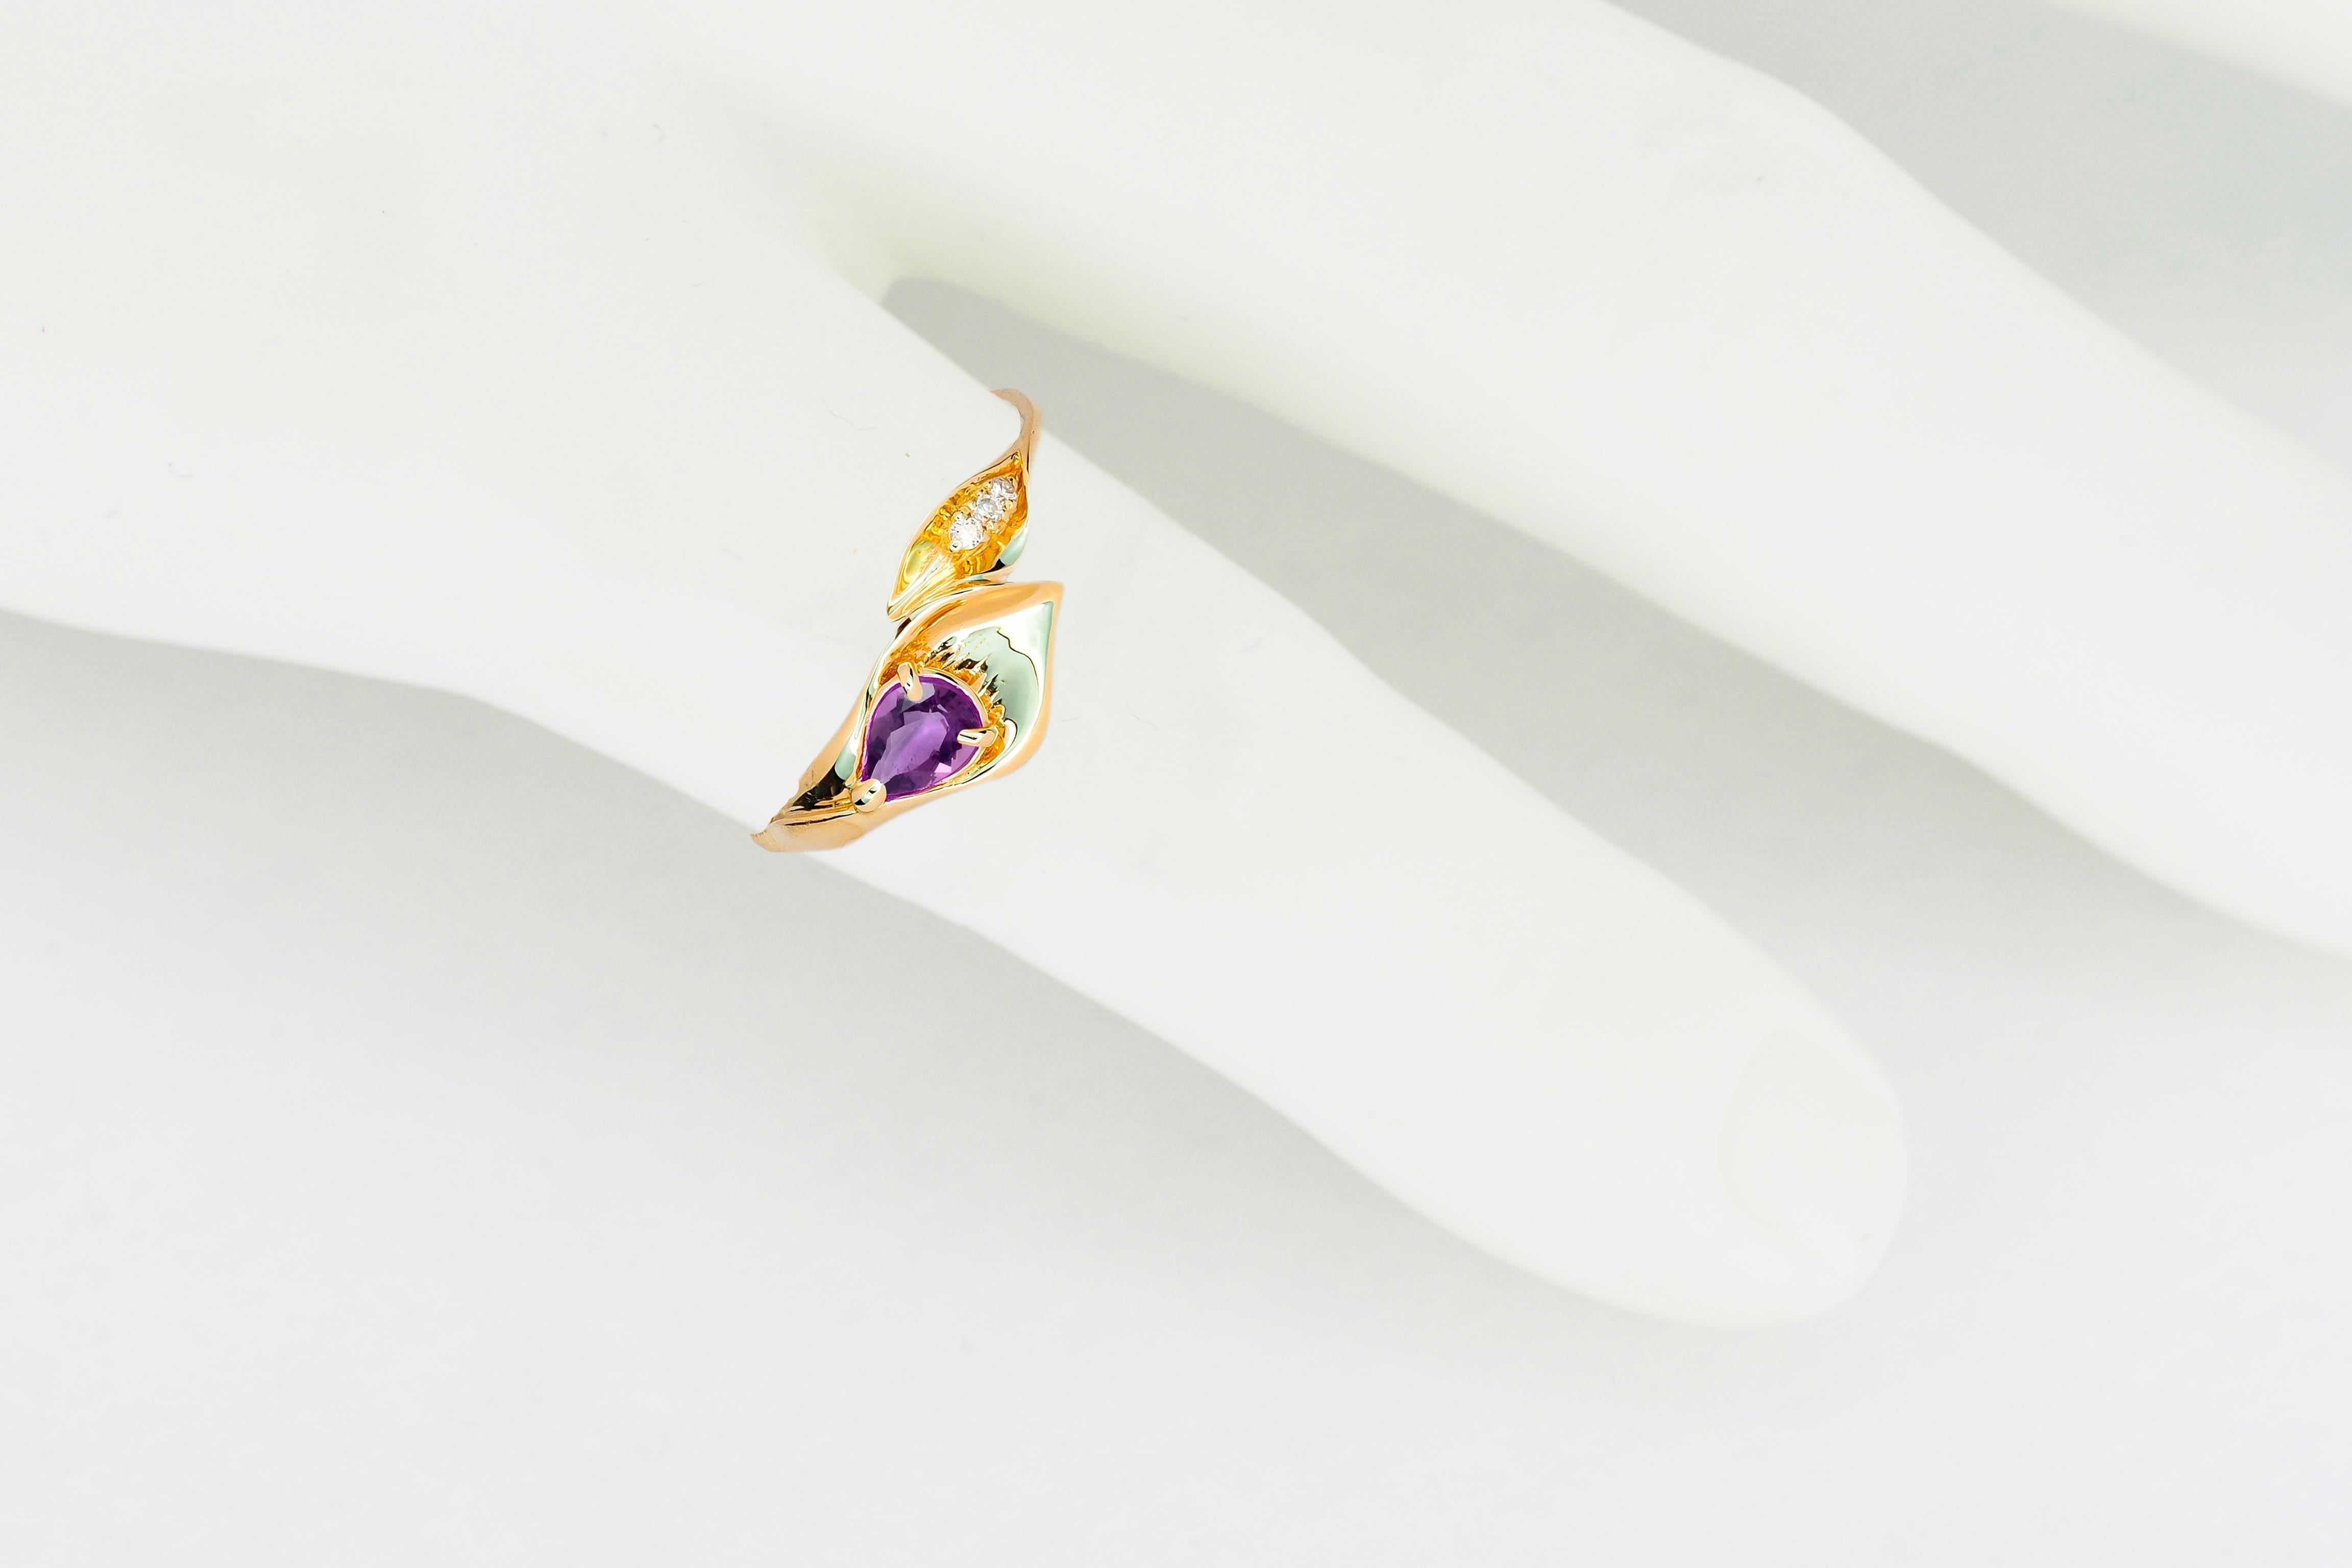 For Sale:  Lily Calla Gold Ring, 14 Karat Gold Ring with Amethyst and Diamonds 6